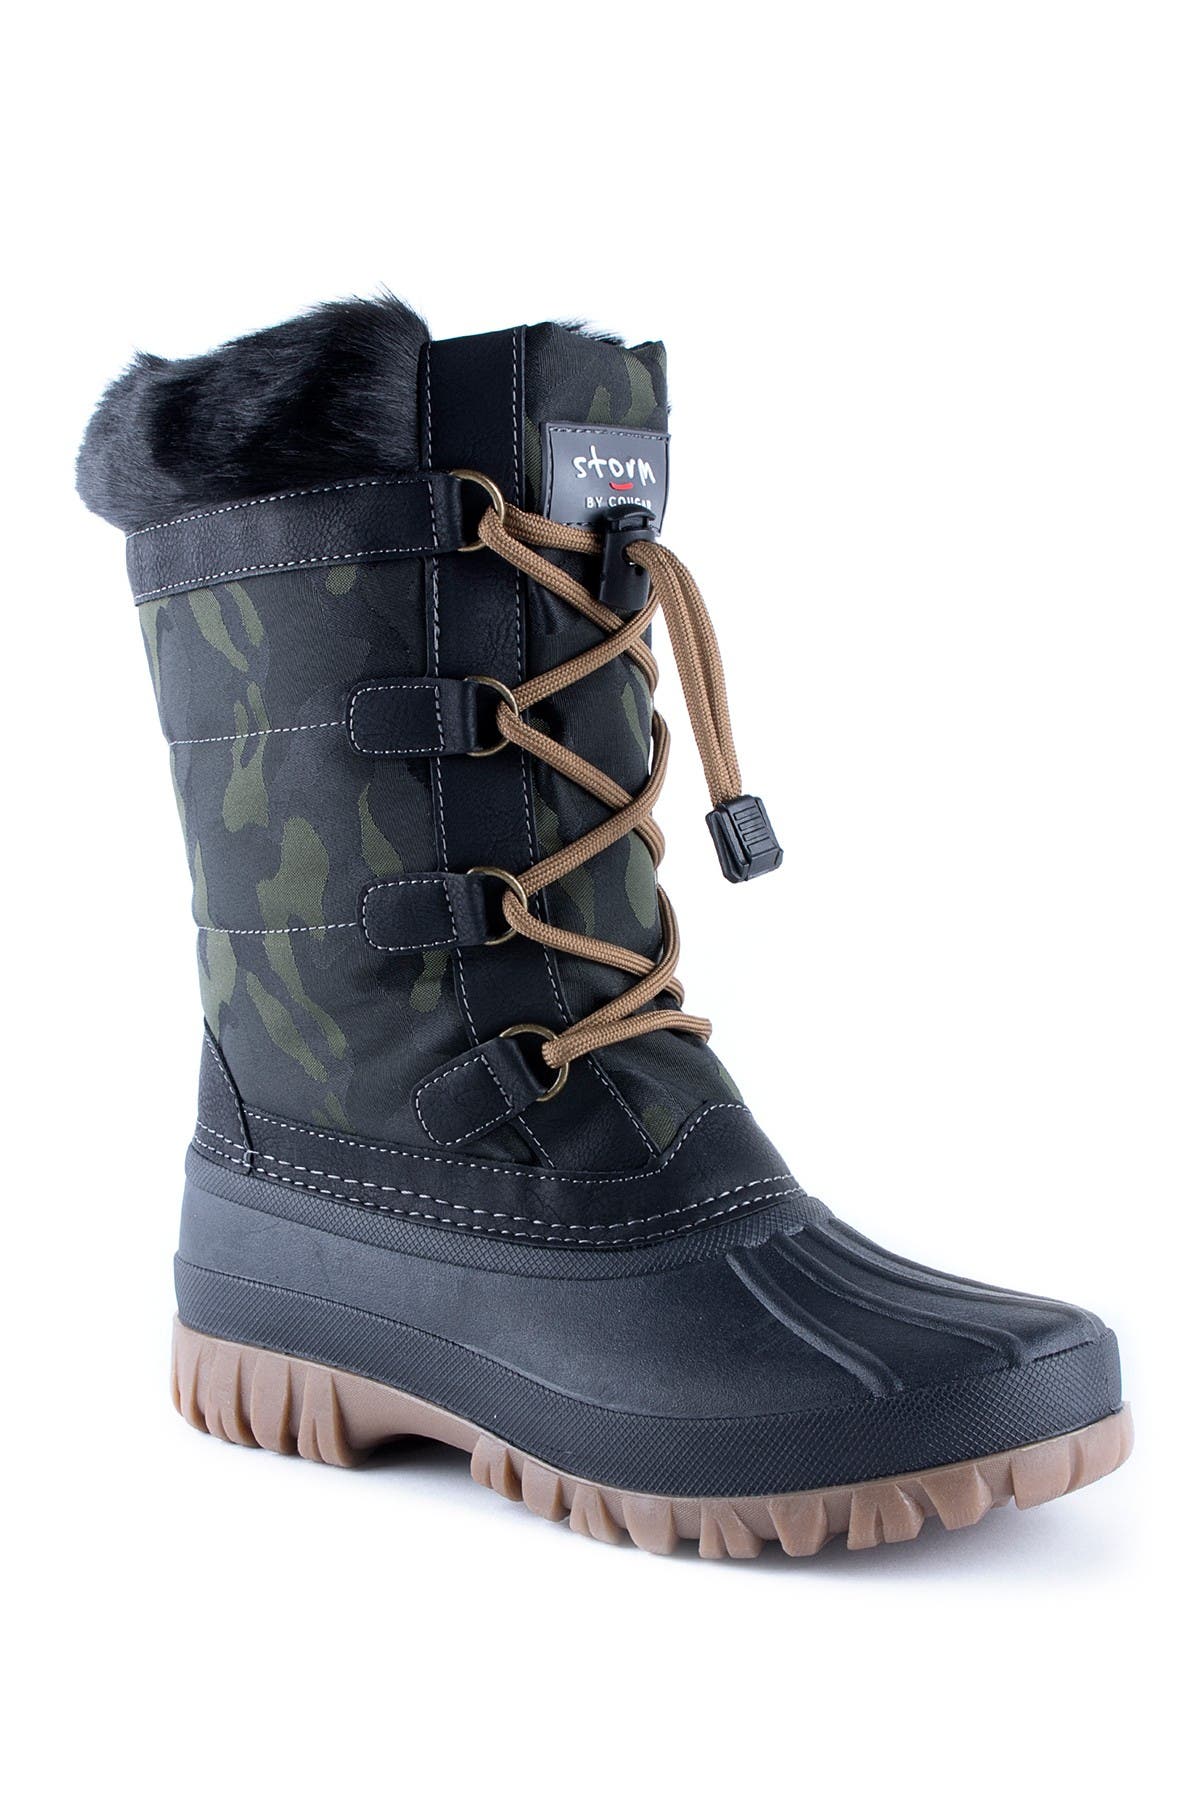 cougar duck boots